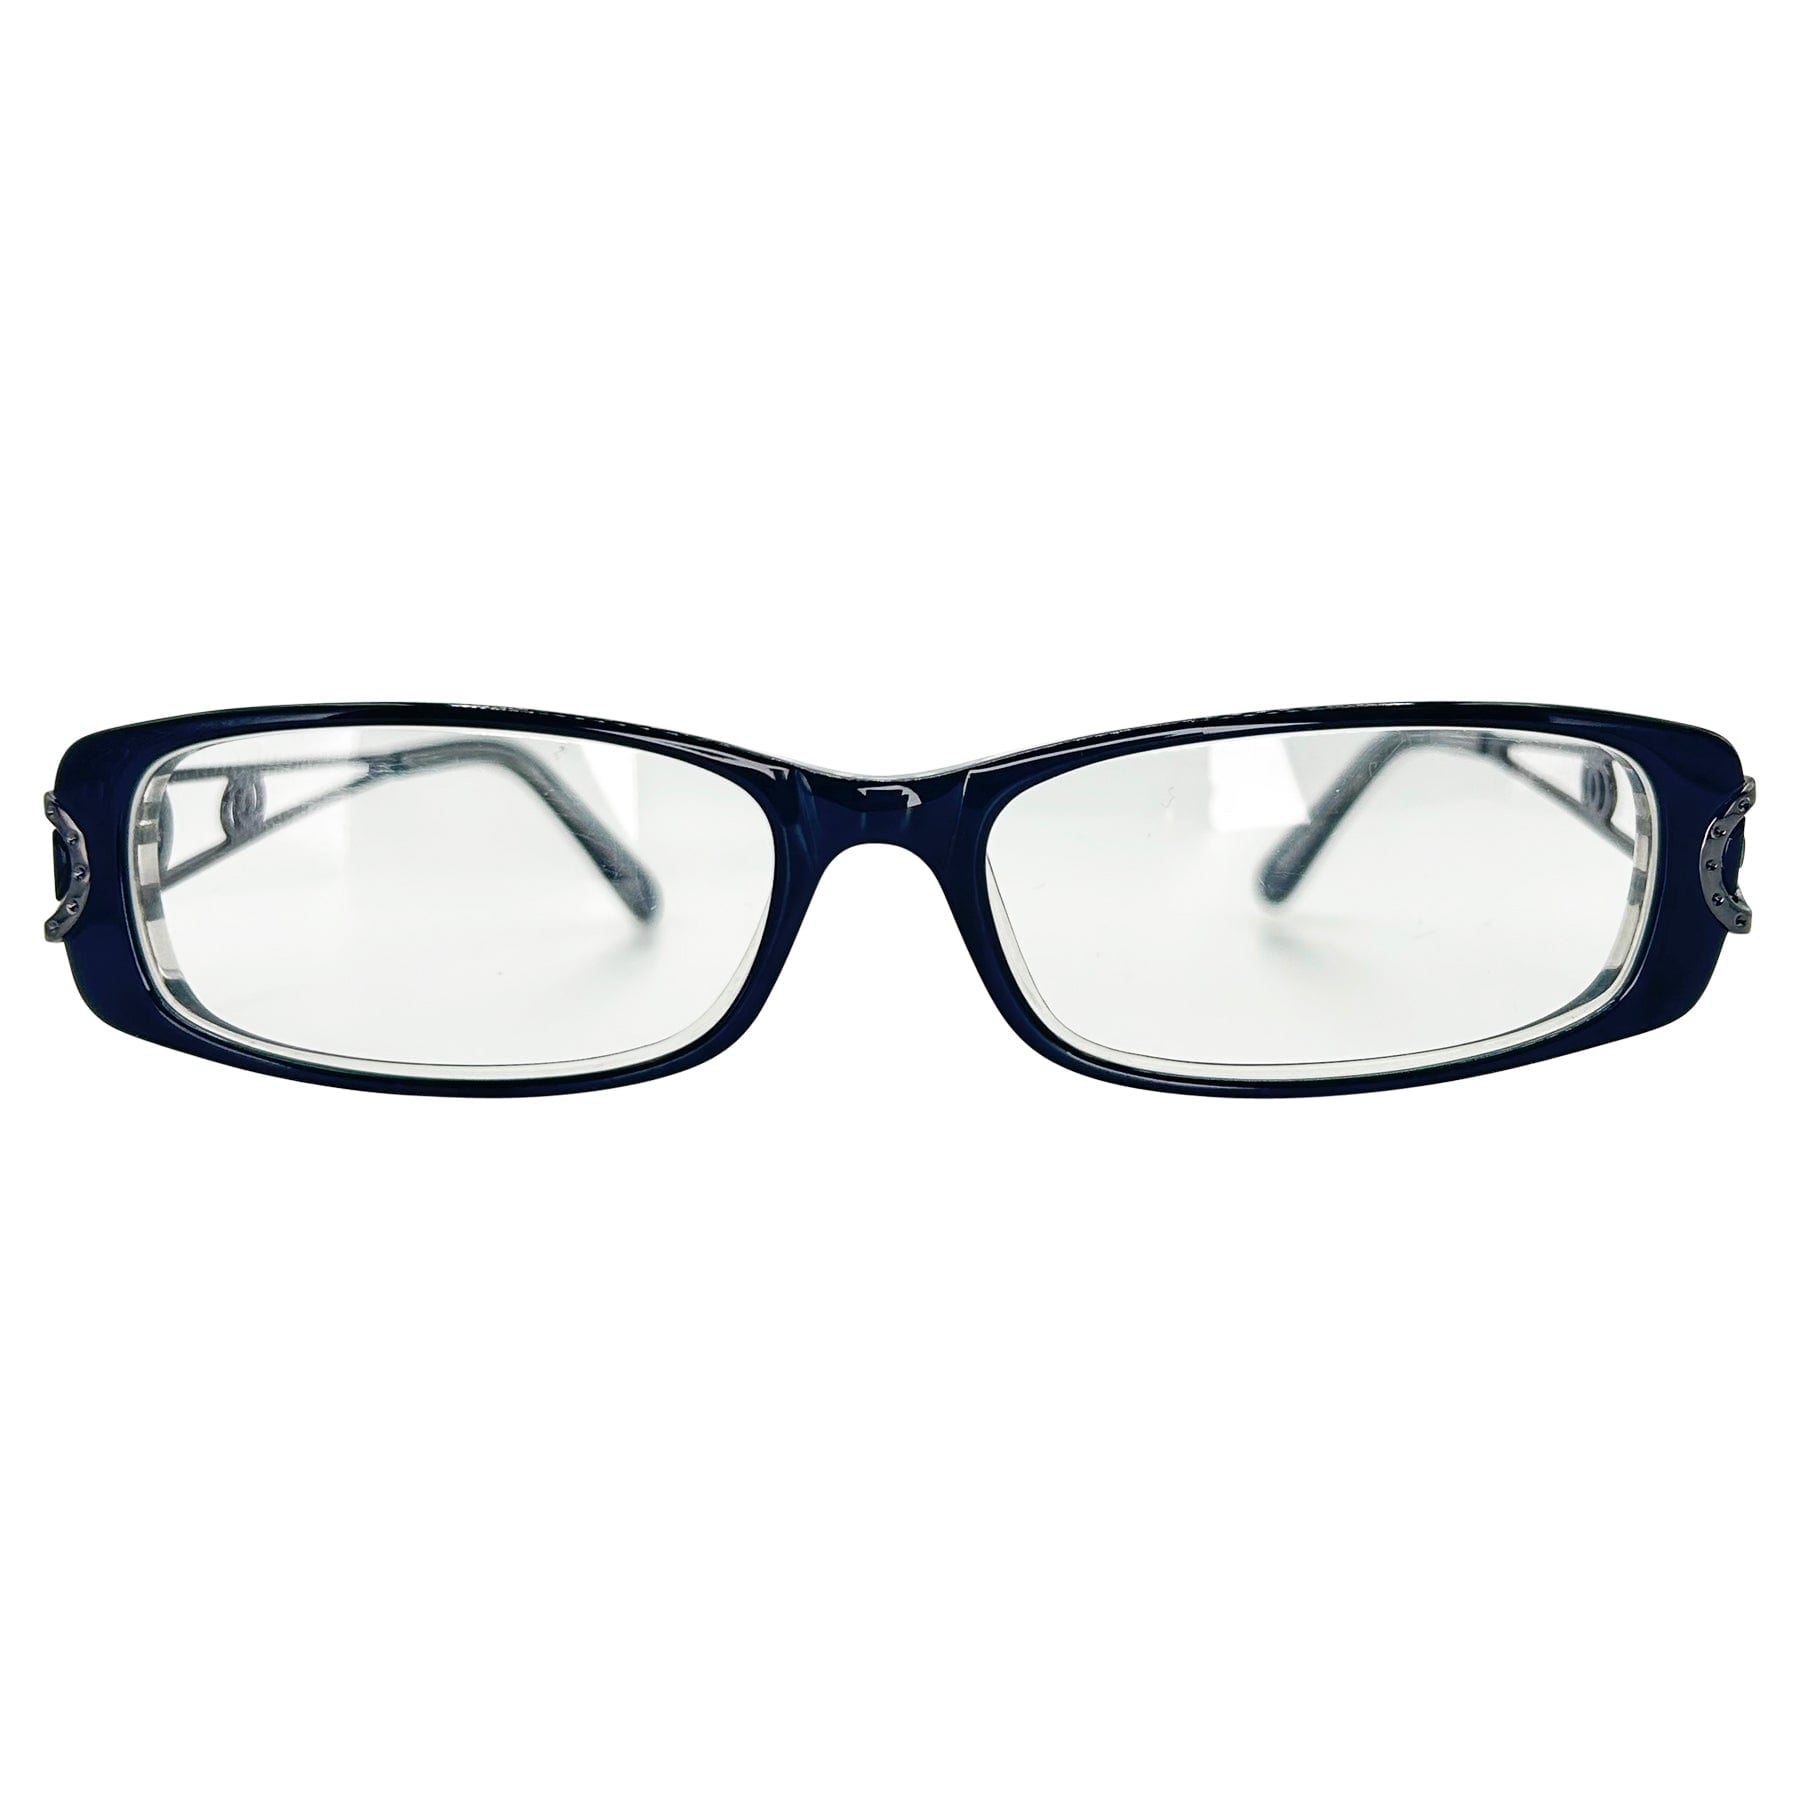 black clear square glasses with a 90s style frame